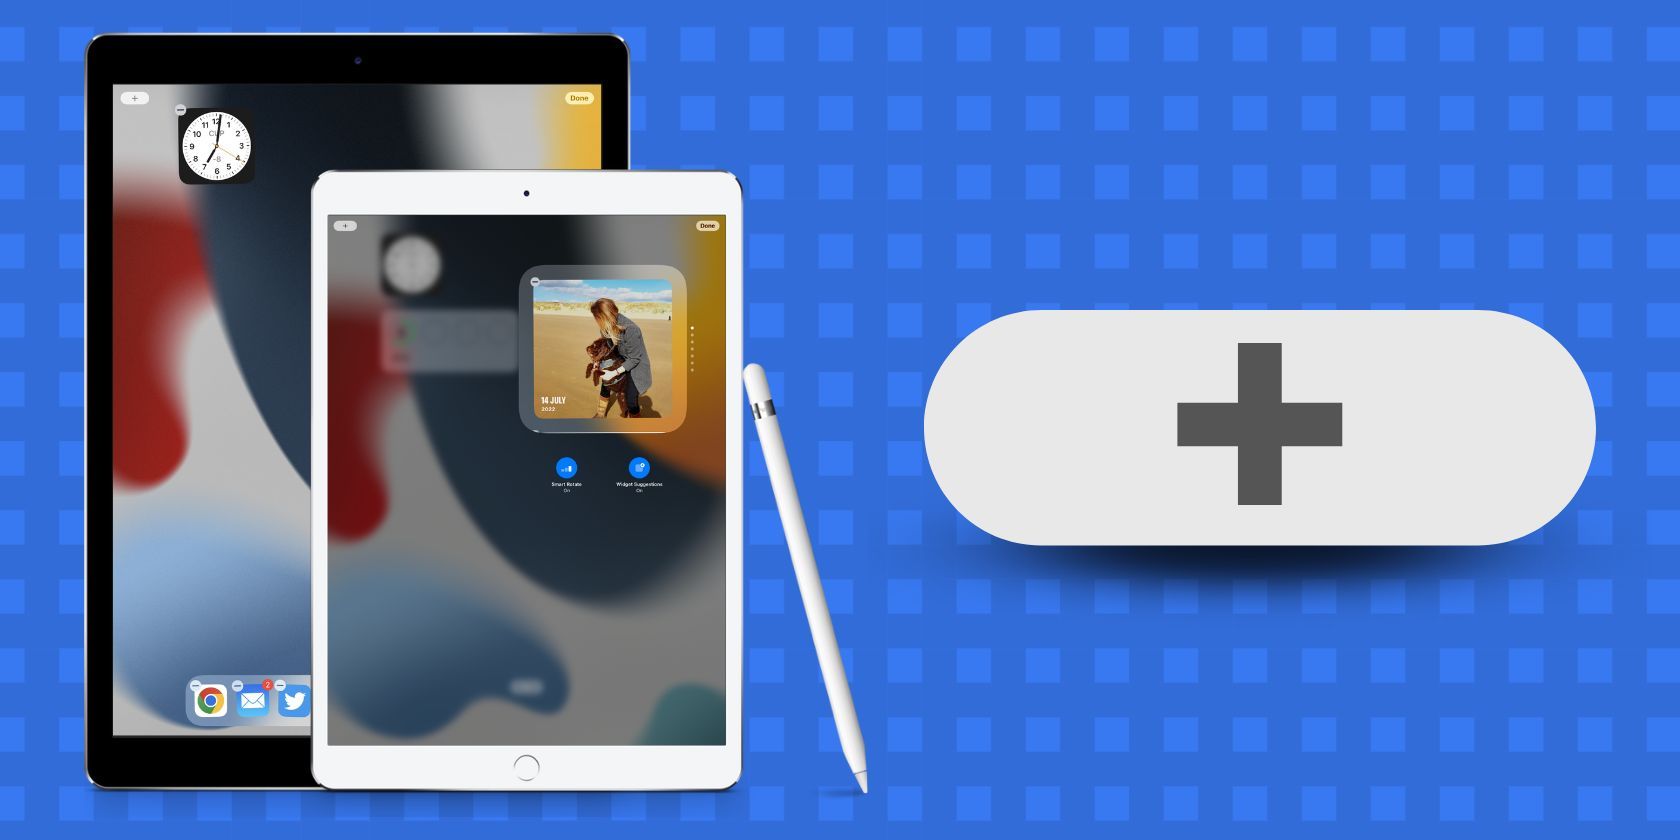 How to Add Widgets to Your iPad Home Screen